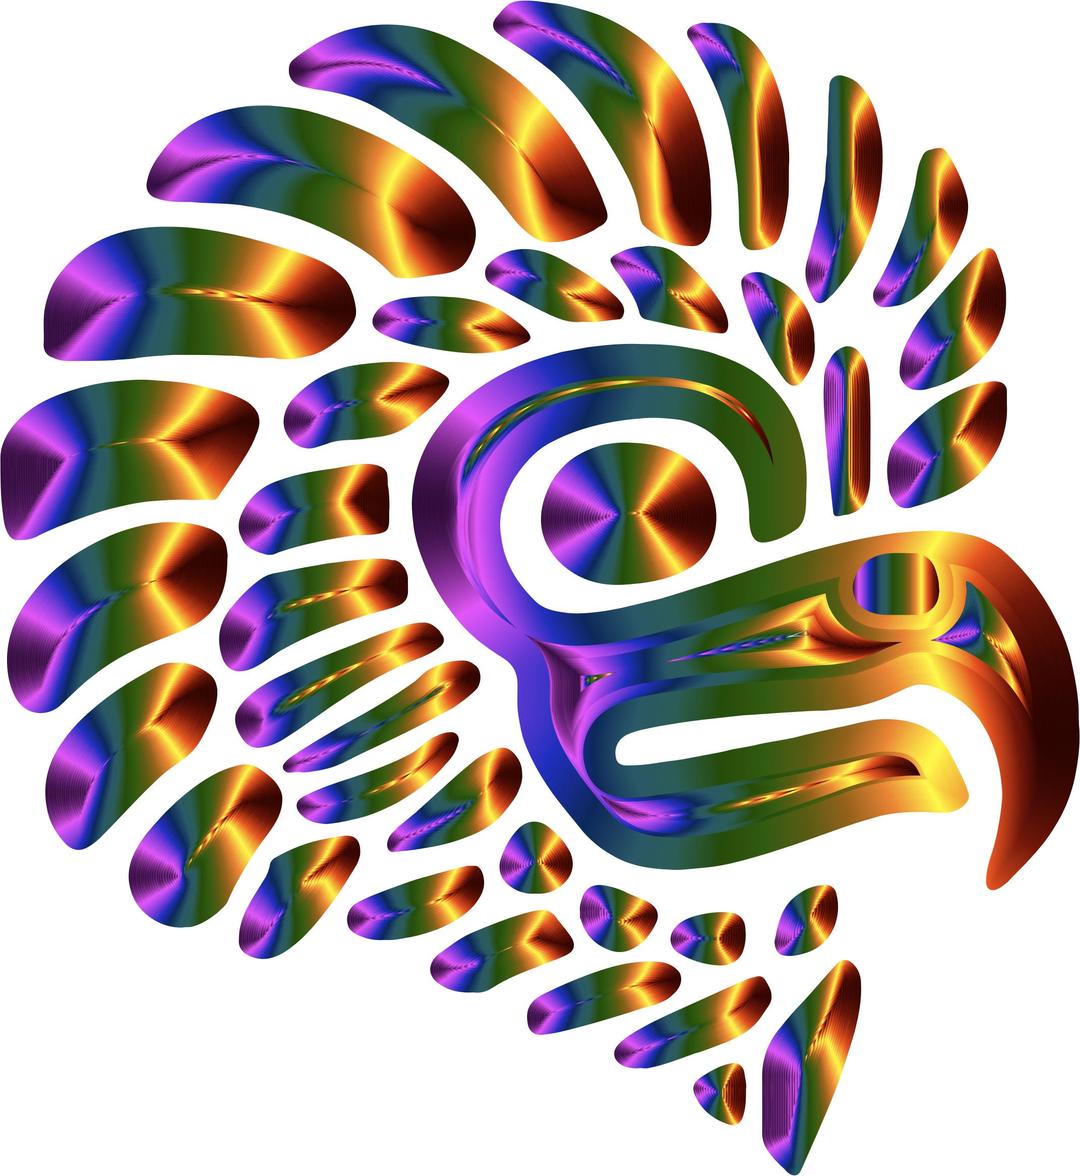 Prismatic Stylized Mexican Eagle Silhouette 5 png transparent